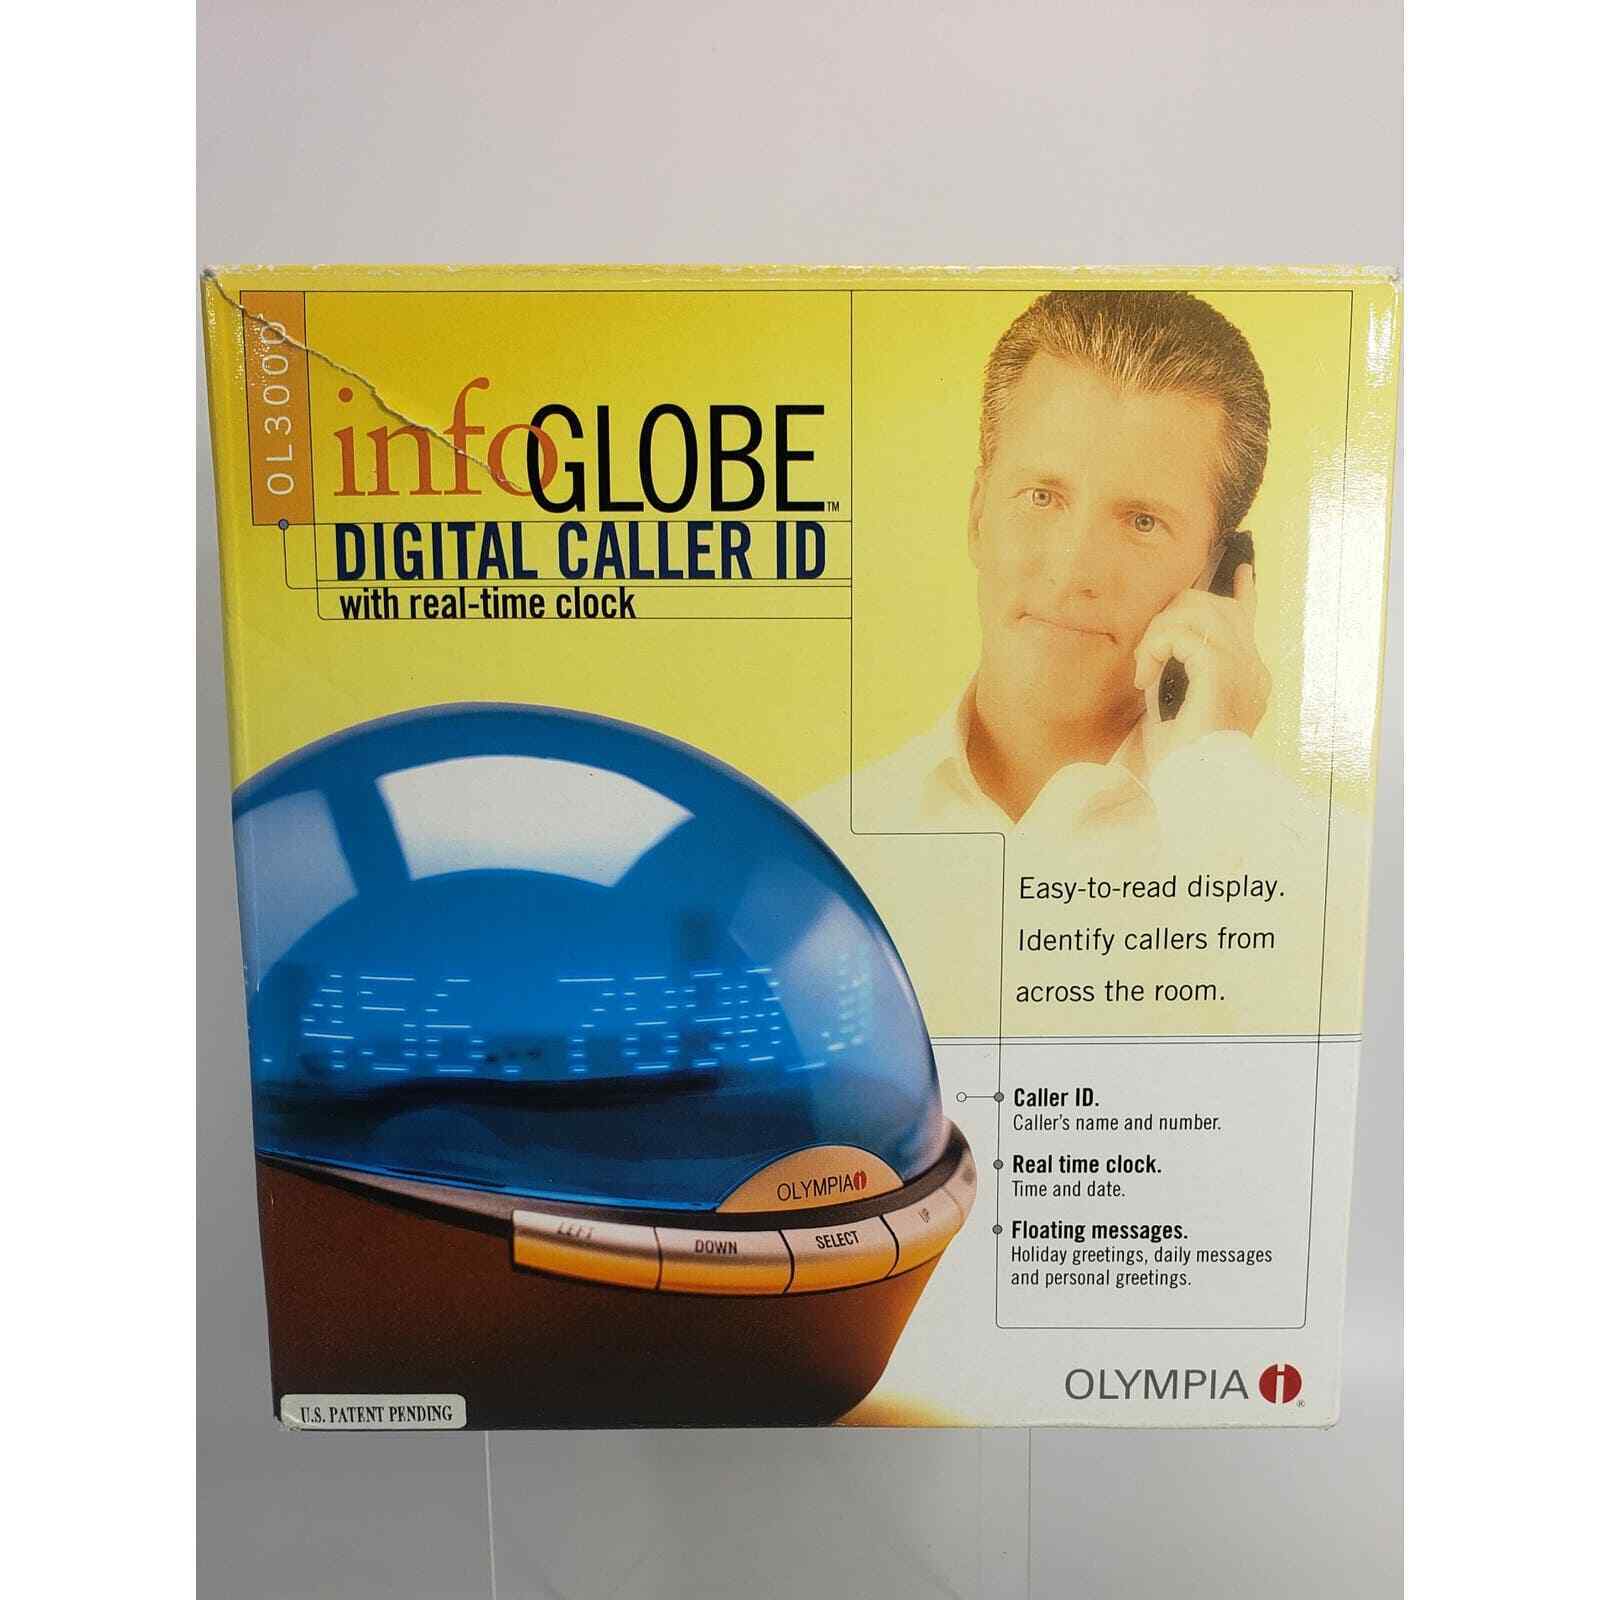 Olympia OL 3000 Infoglobe Digital Caller ID with Real-Time Clock